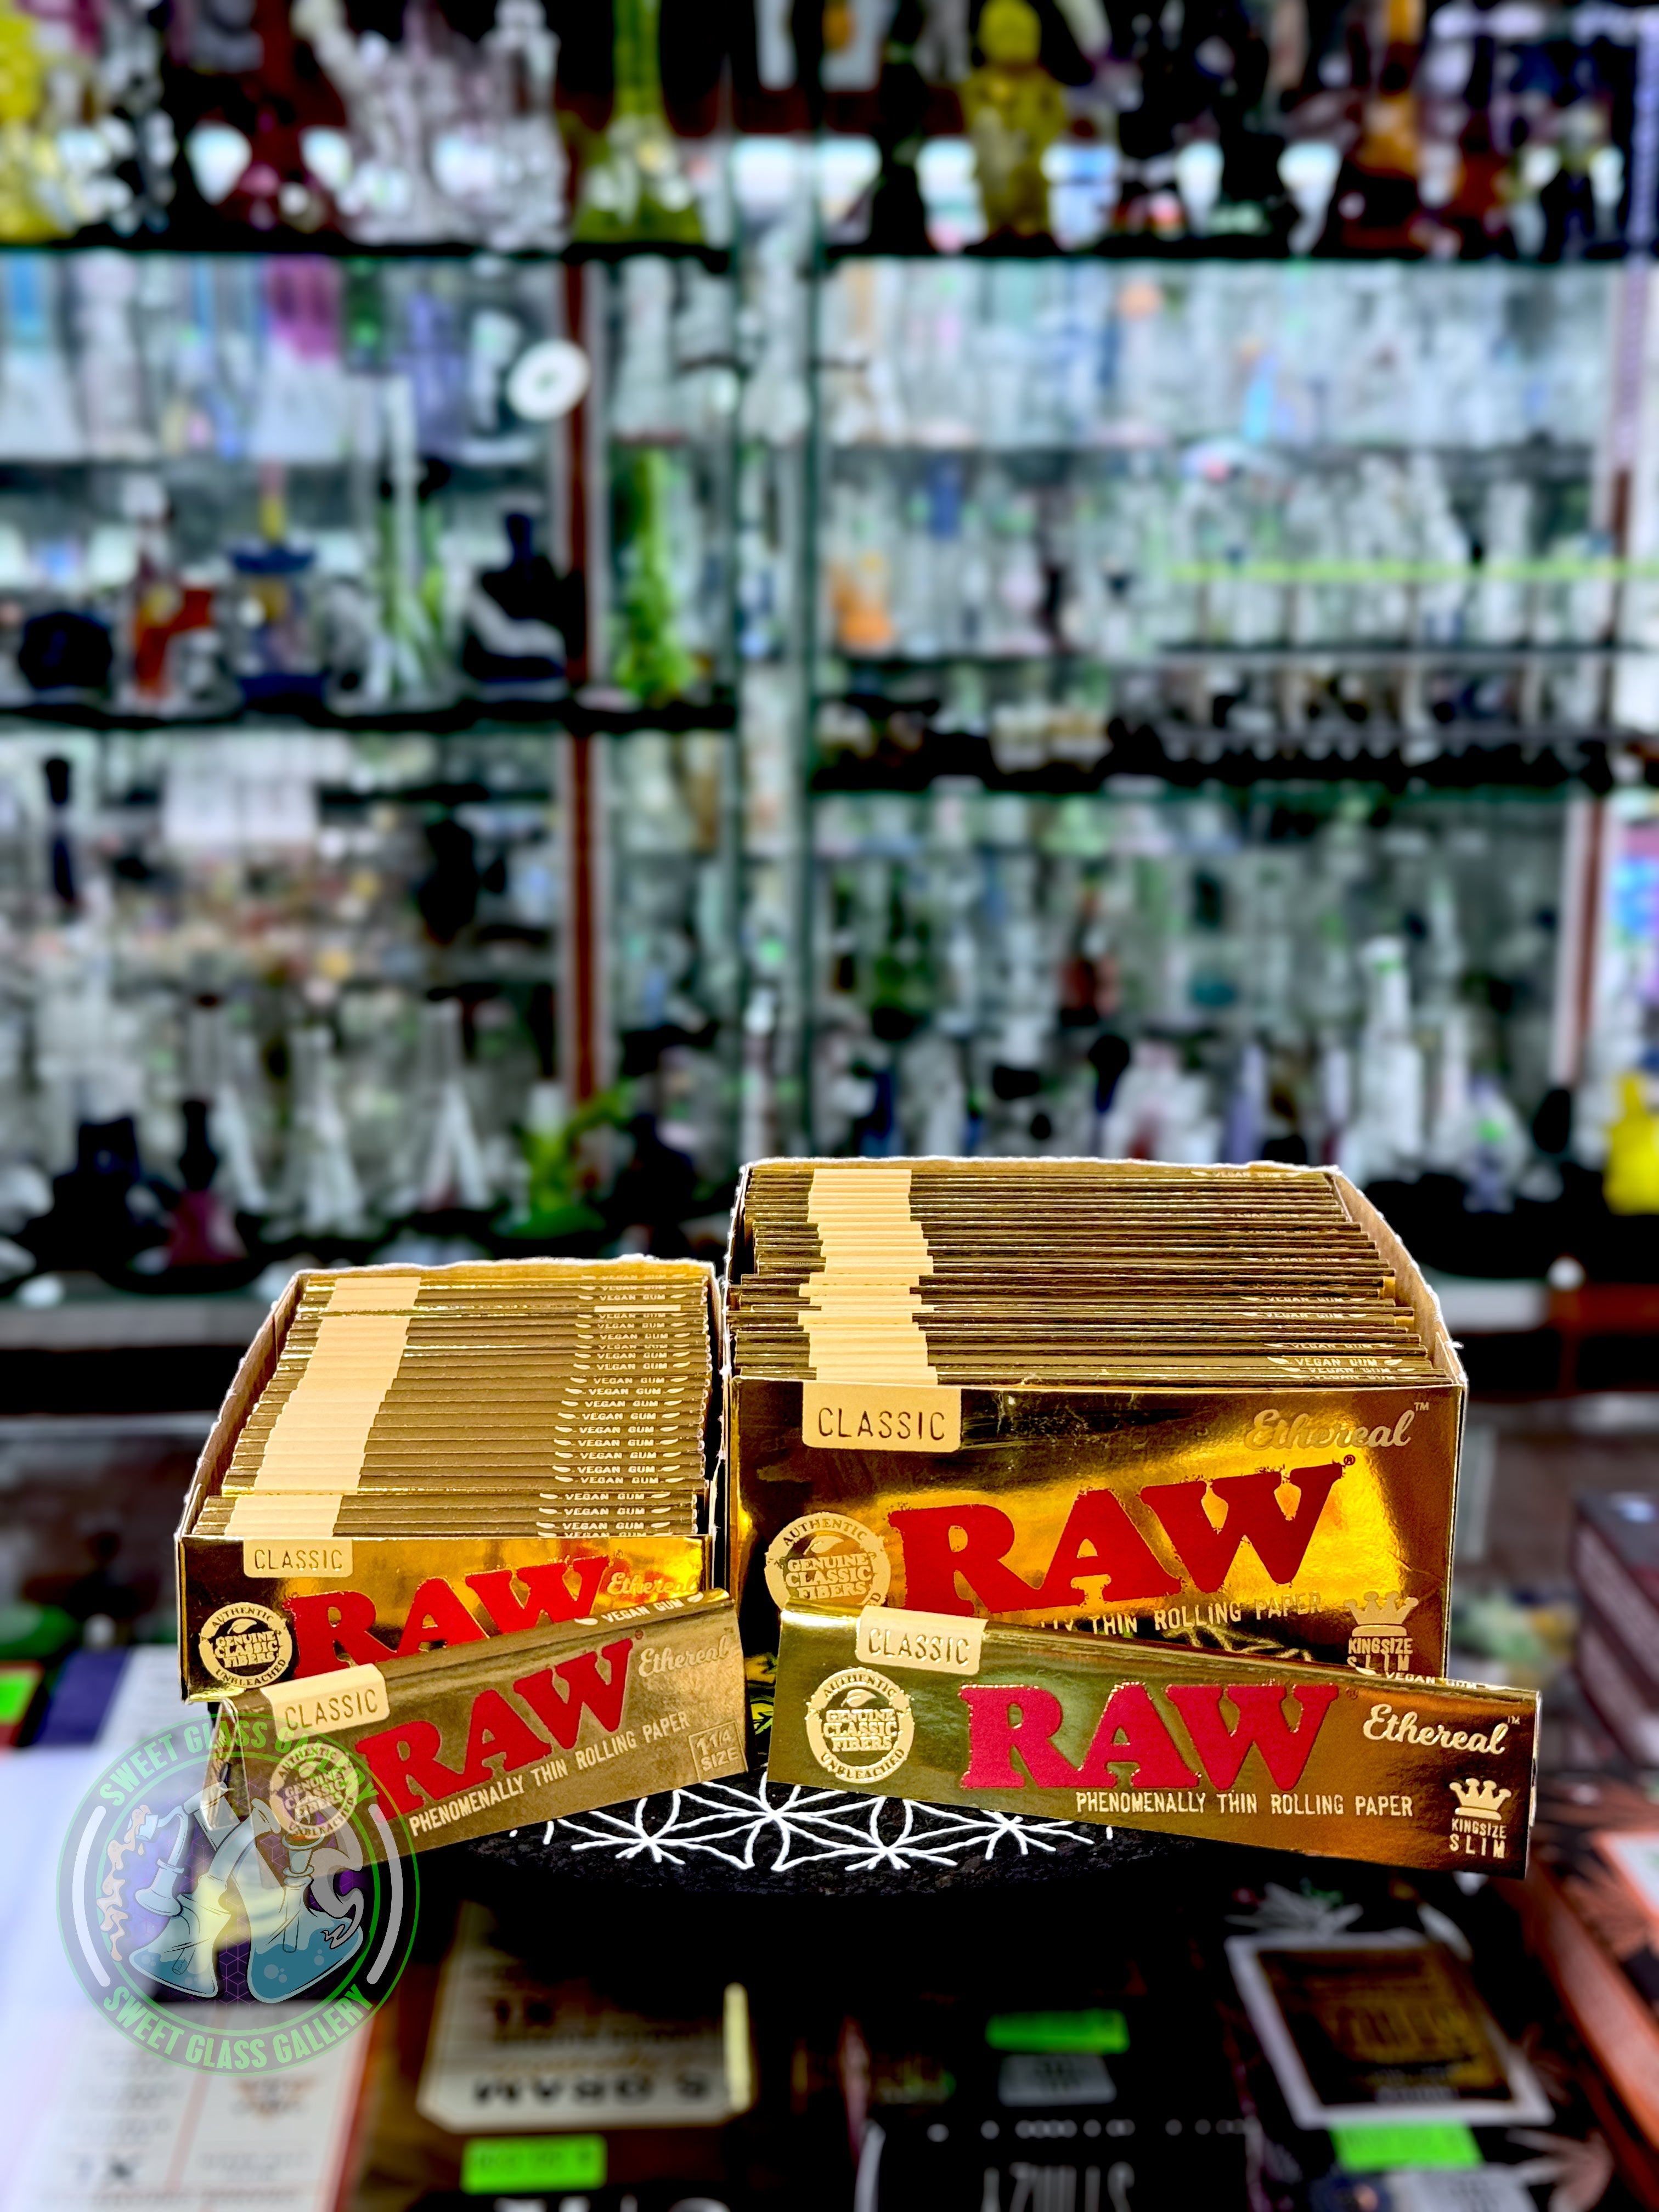 Raw - Ethereal (Phenomenally Thin Rolling Paper)